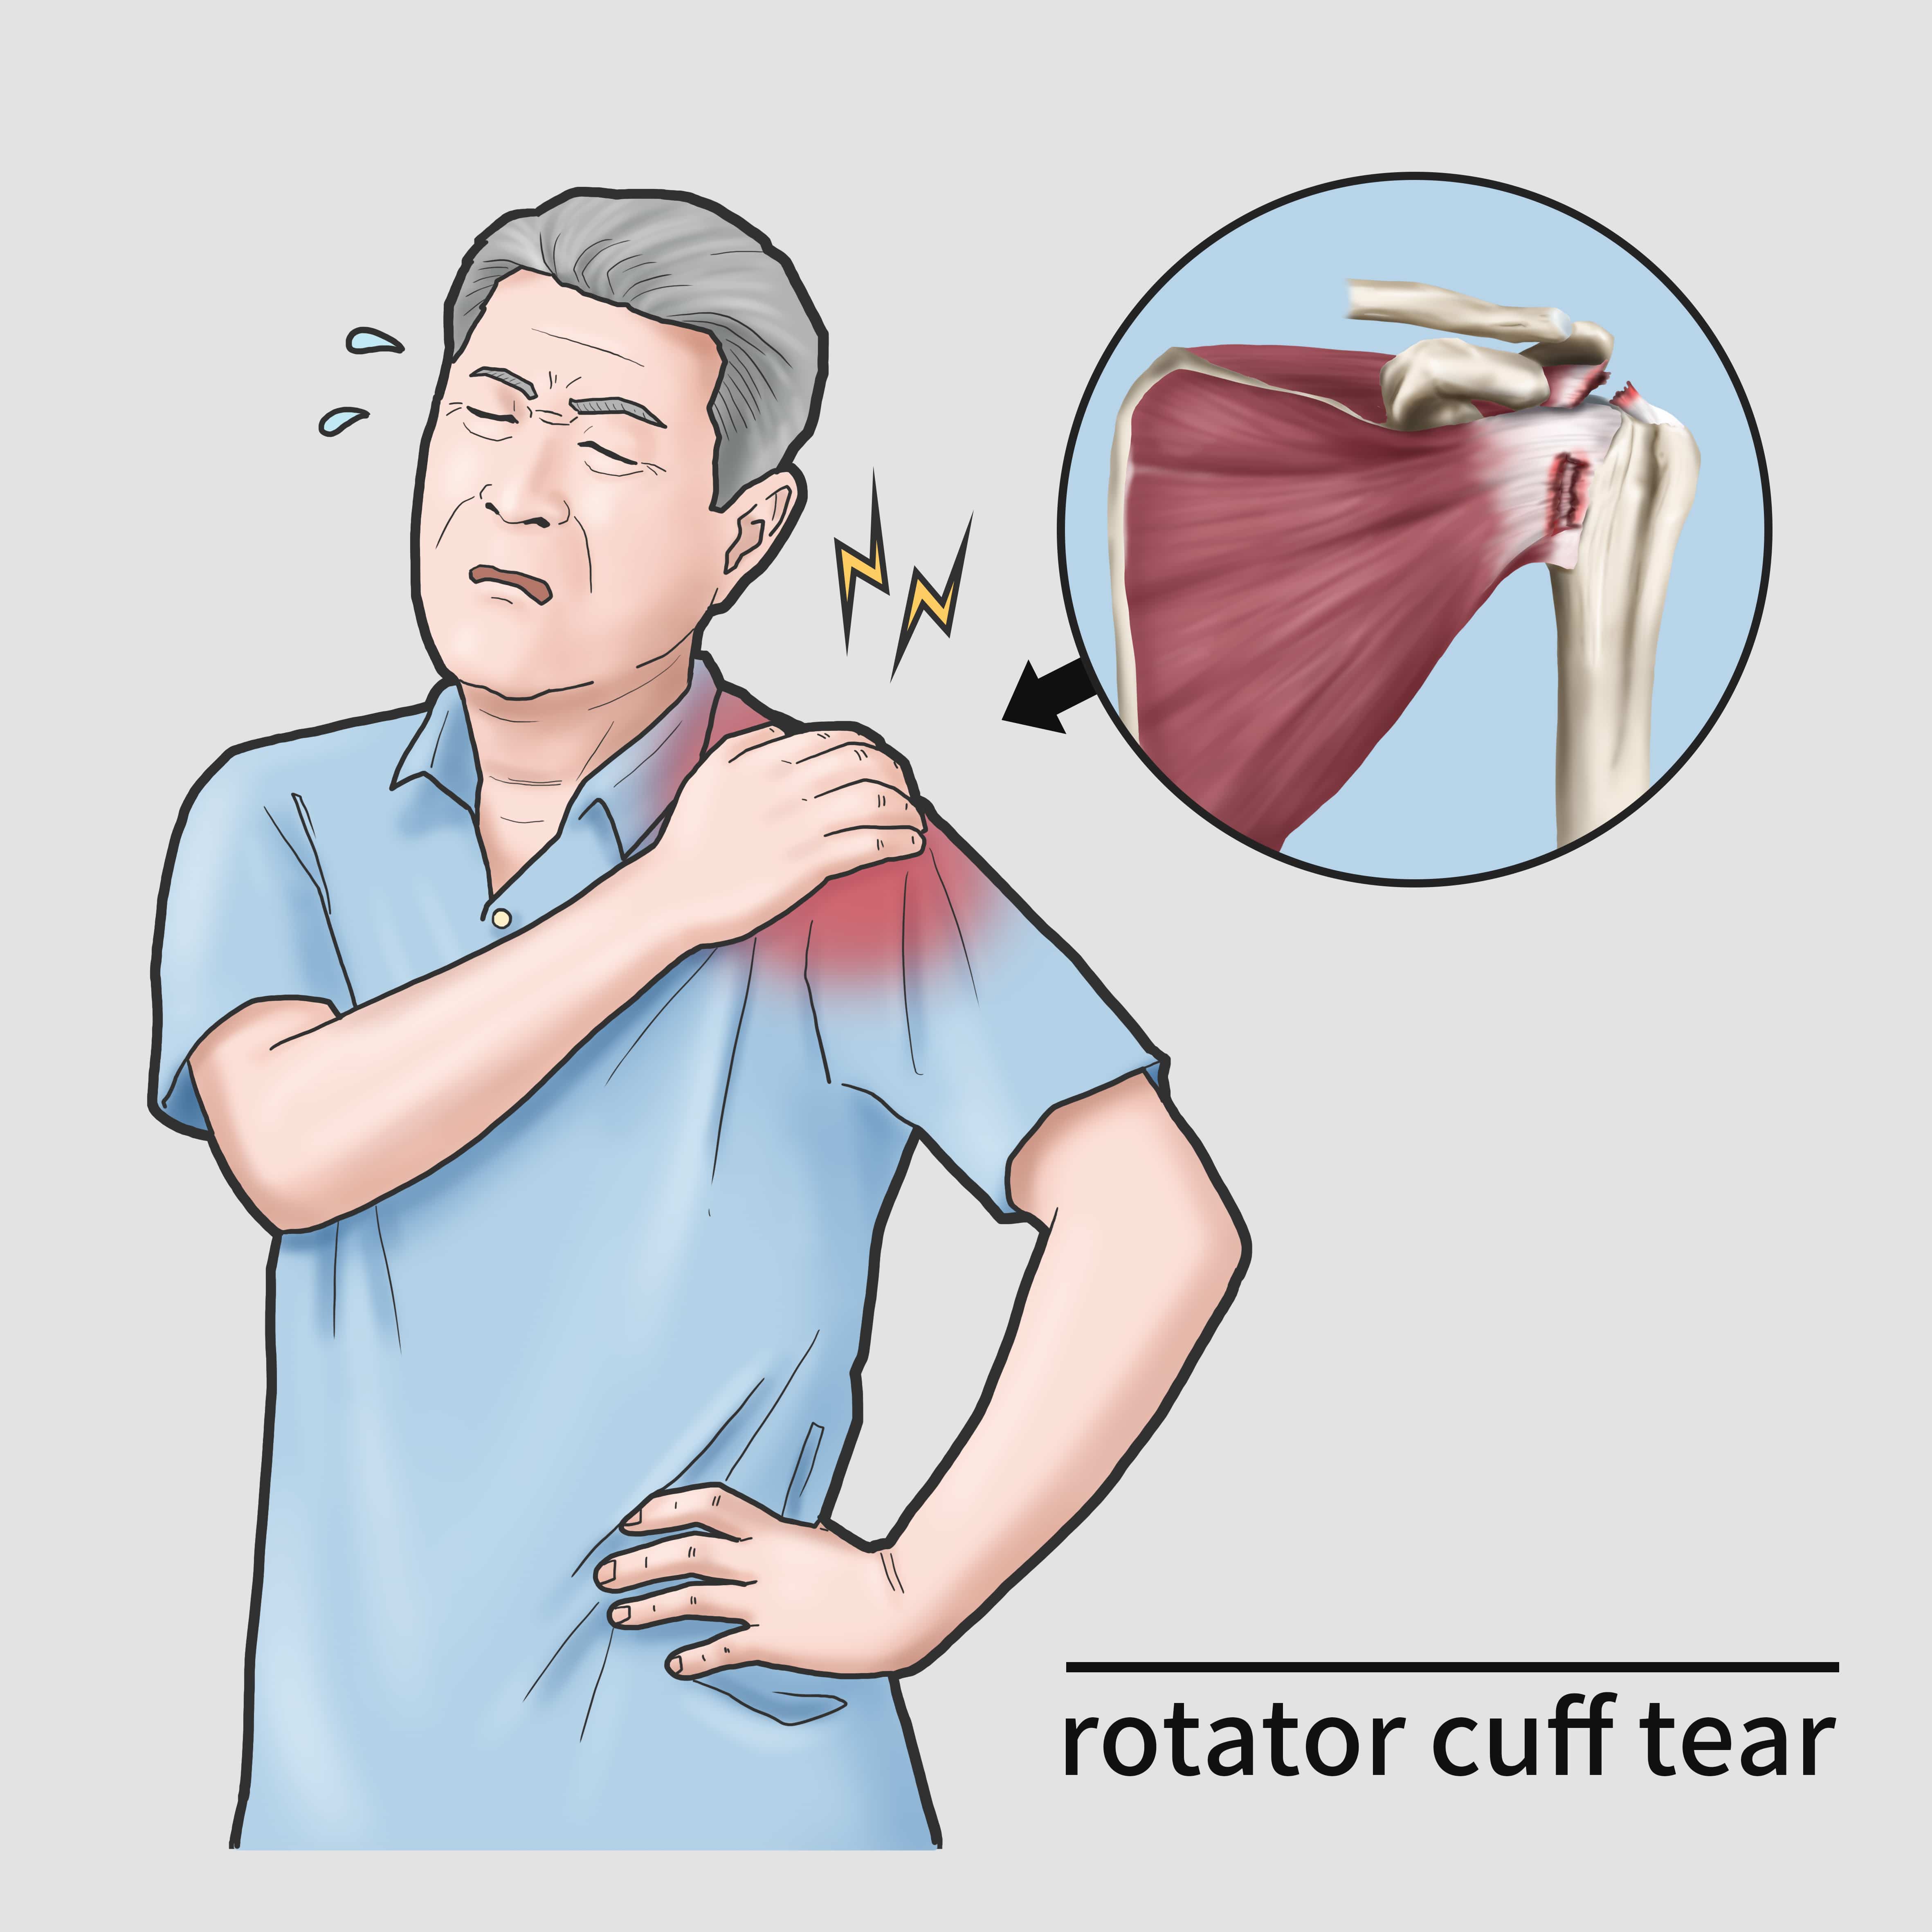 Common Questions About Rotator Cuff Tears